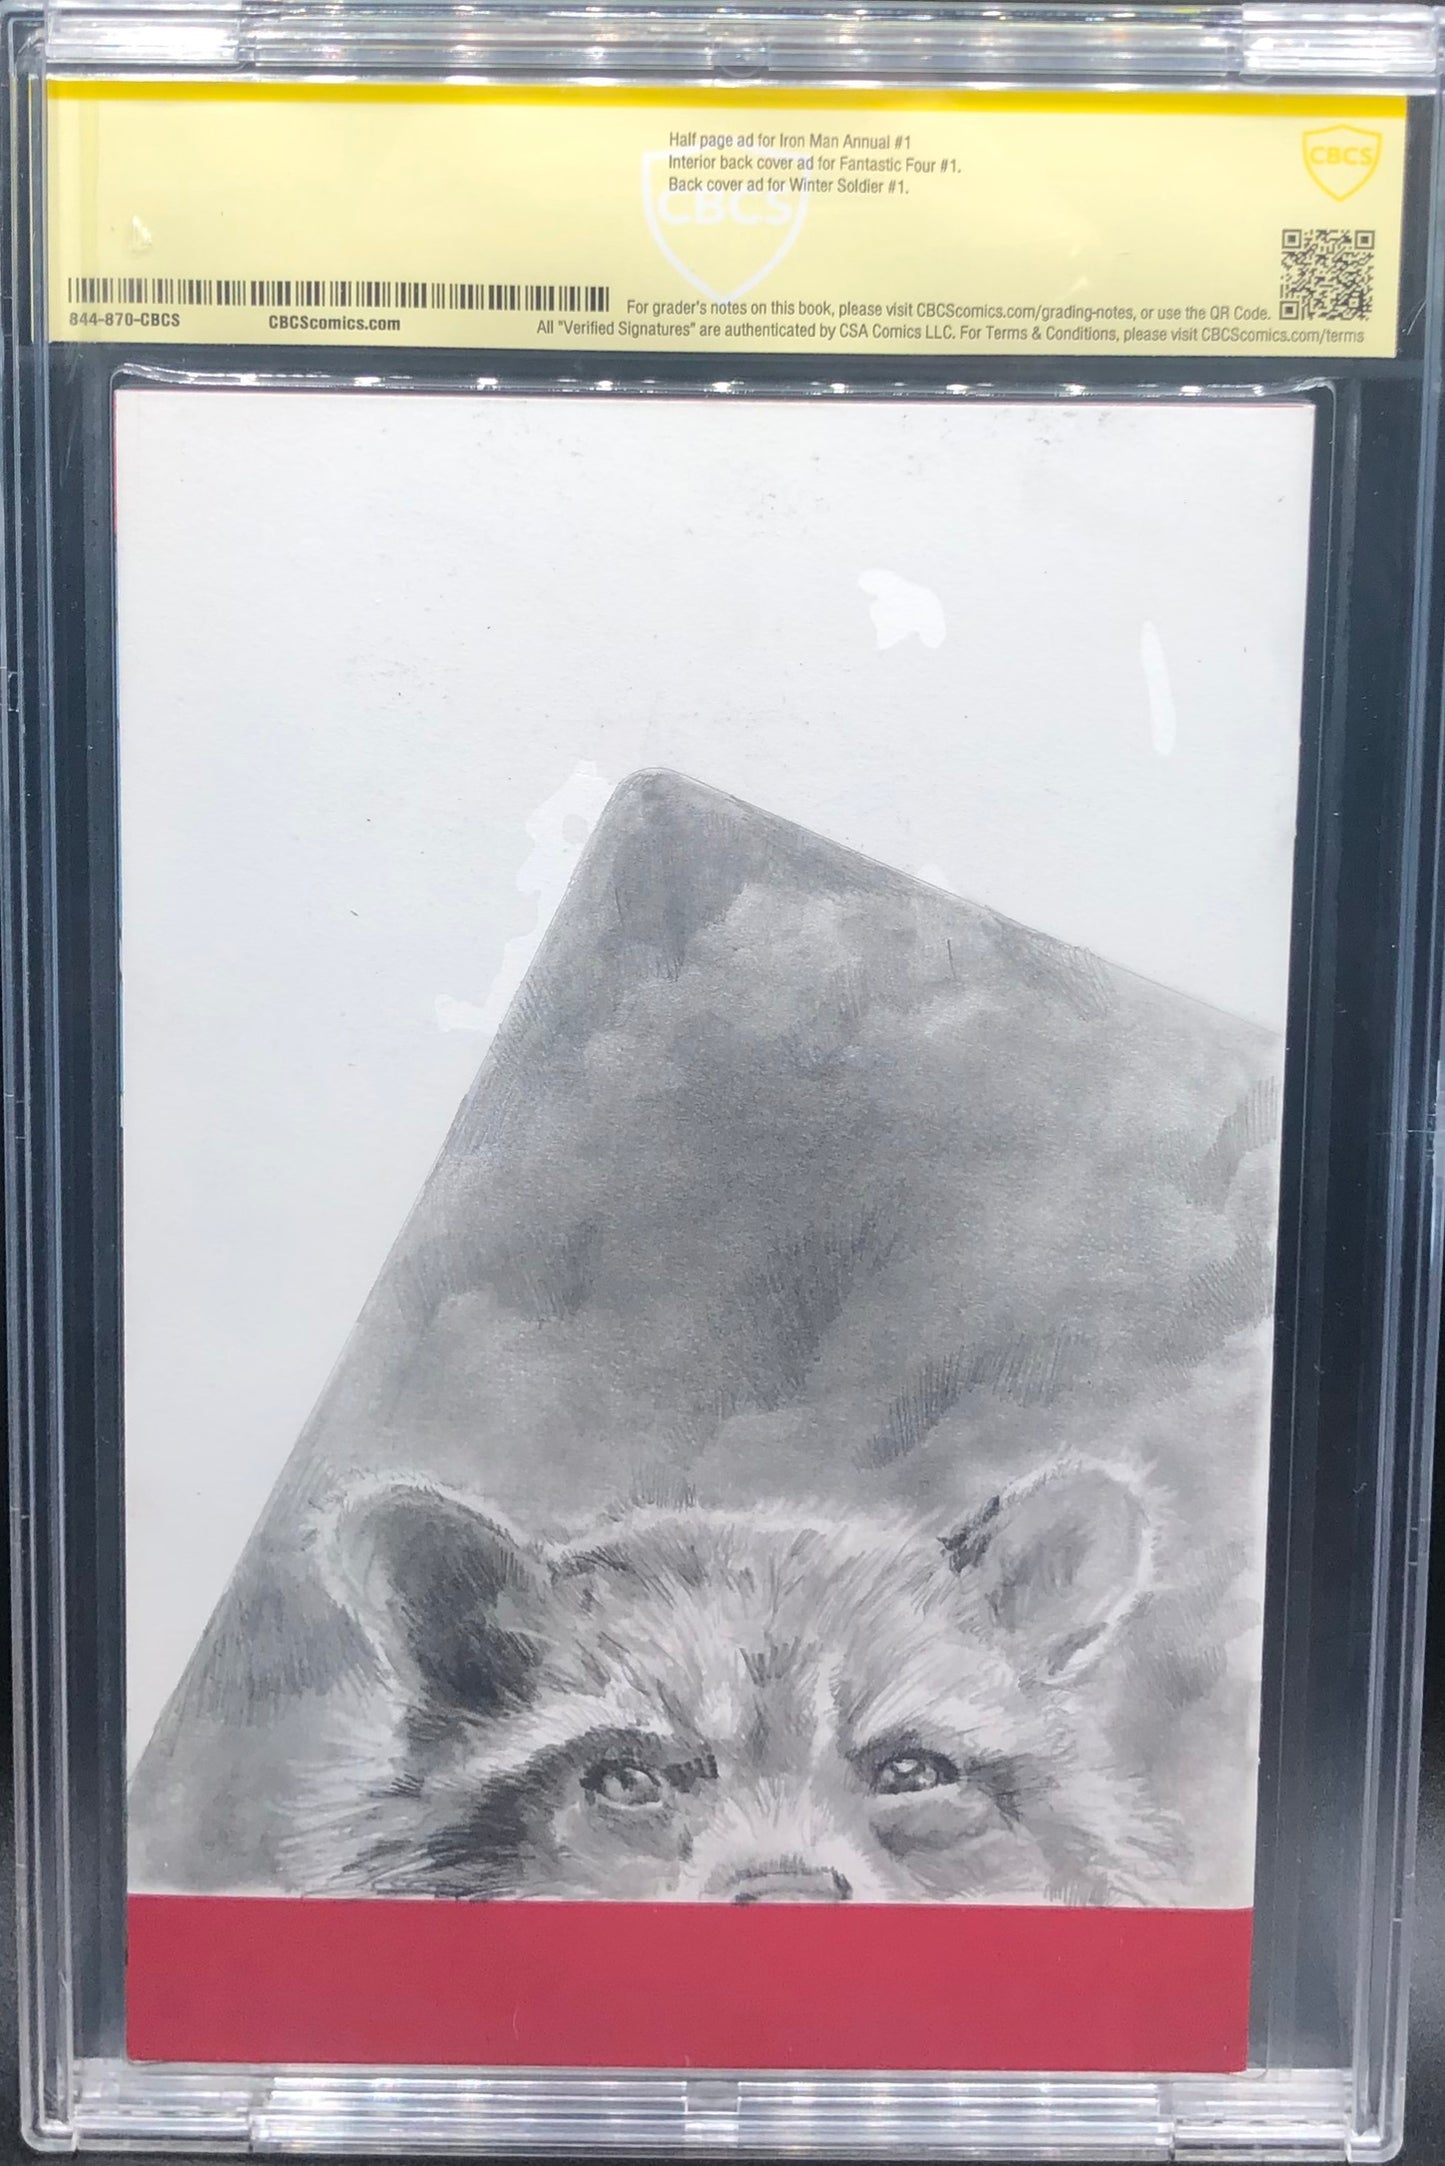 Guardians of the Galaxy #11 Wrap-around Sketch Cover CBCS ART Grade Yellow Label Jay Fife